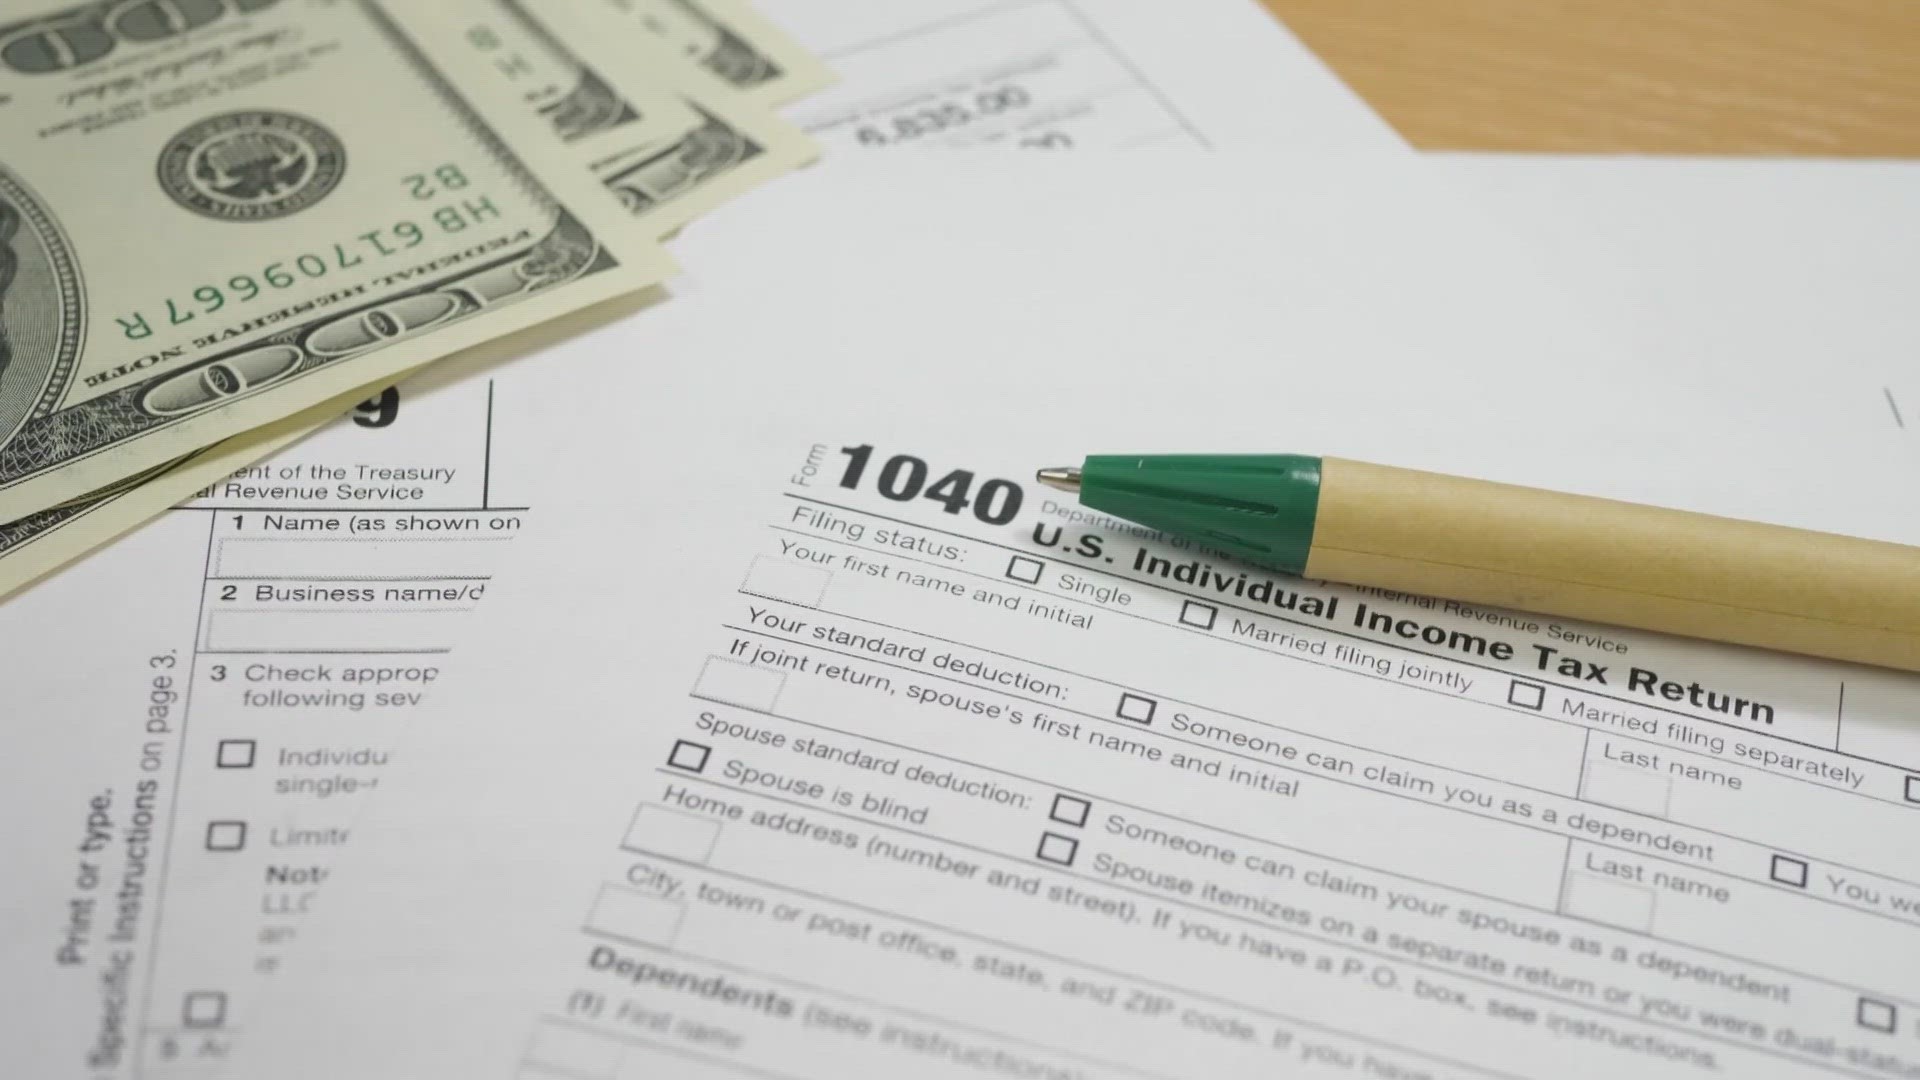 A tax expert in Arizona has some pointers to help you as the April 15th tax filing deadline approaches. Watch the video above for more.